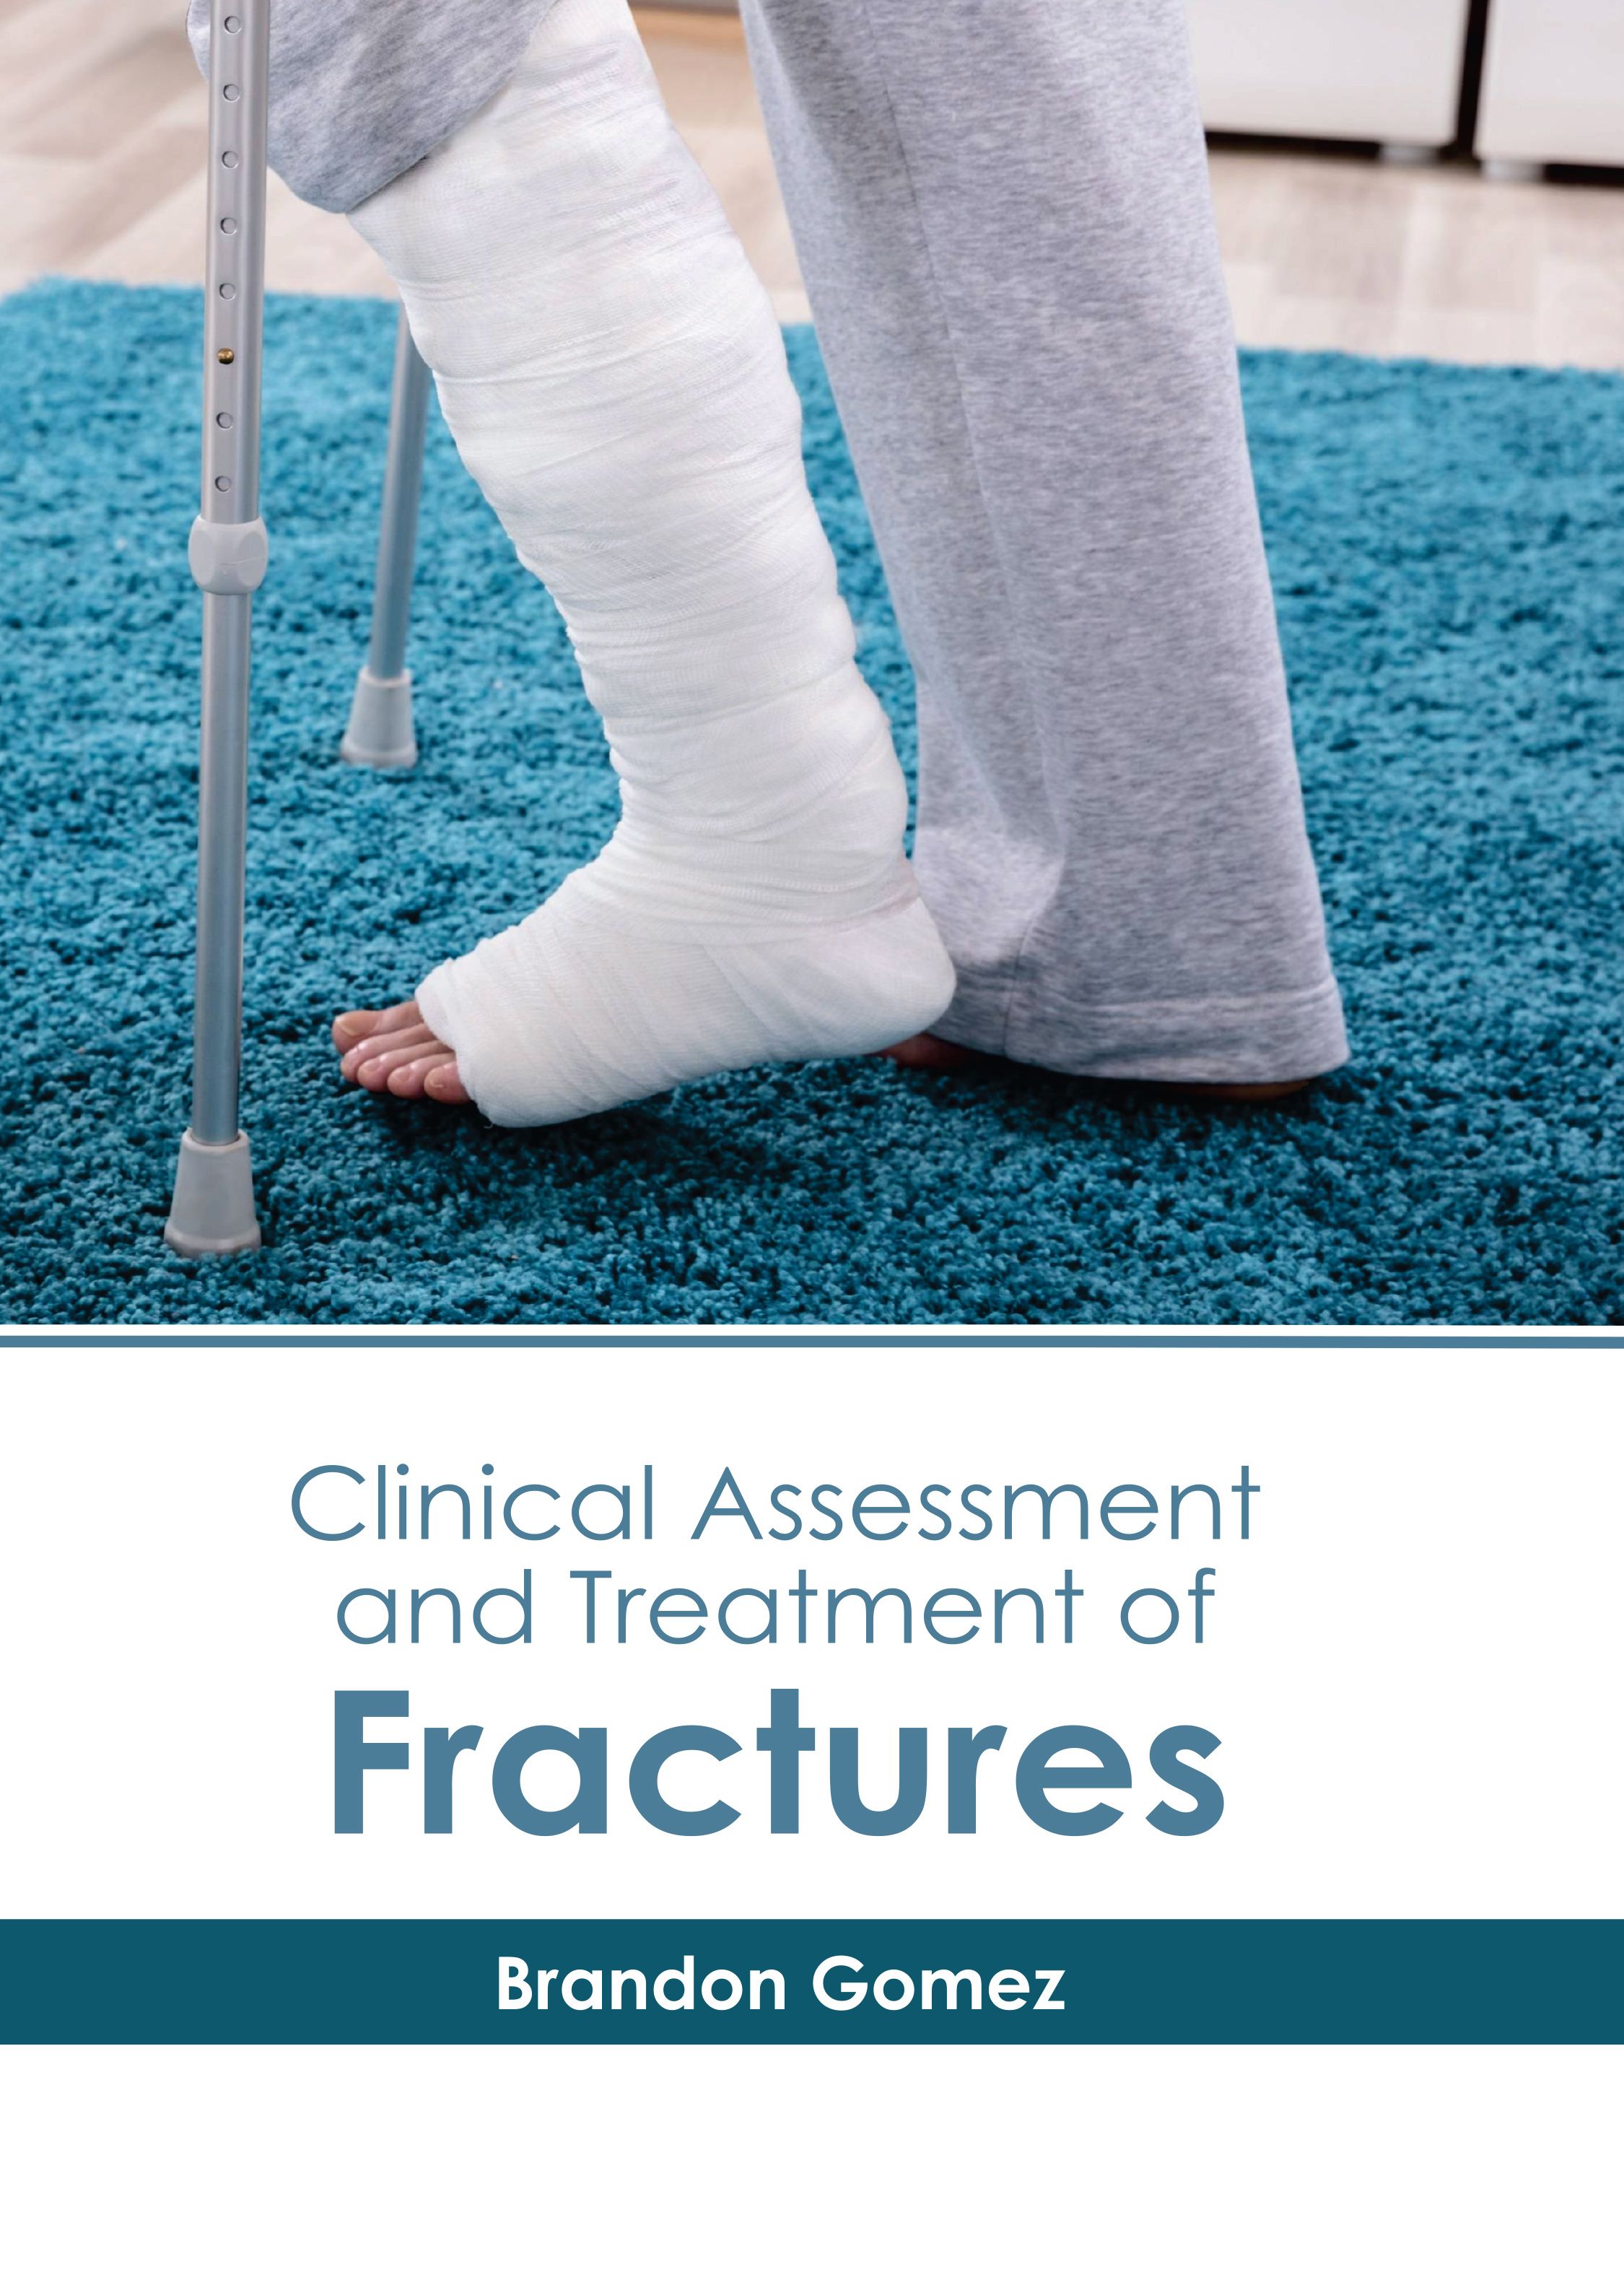 CLINICAL ASSESSMENT AND TREATMENT OF FRACTURES